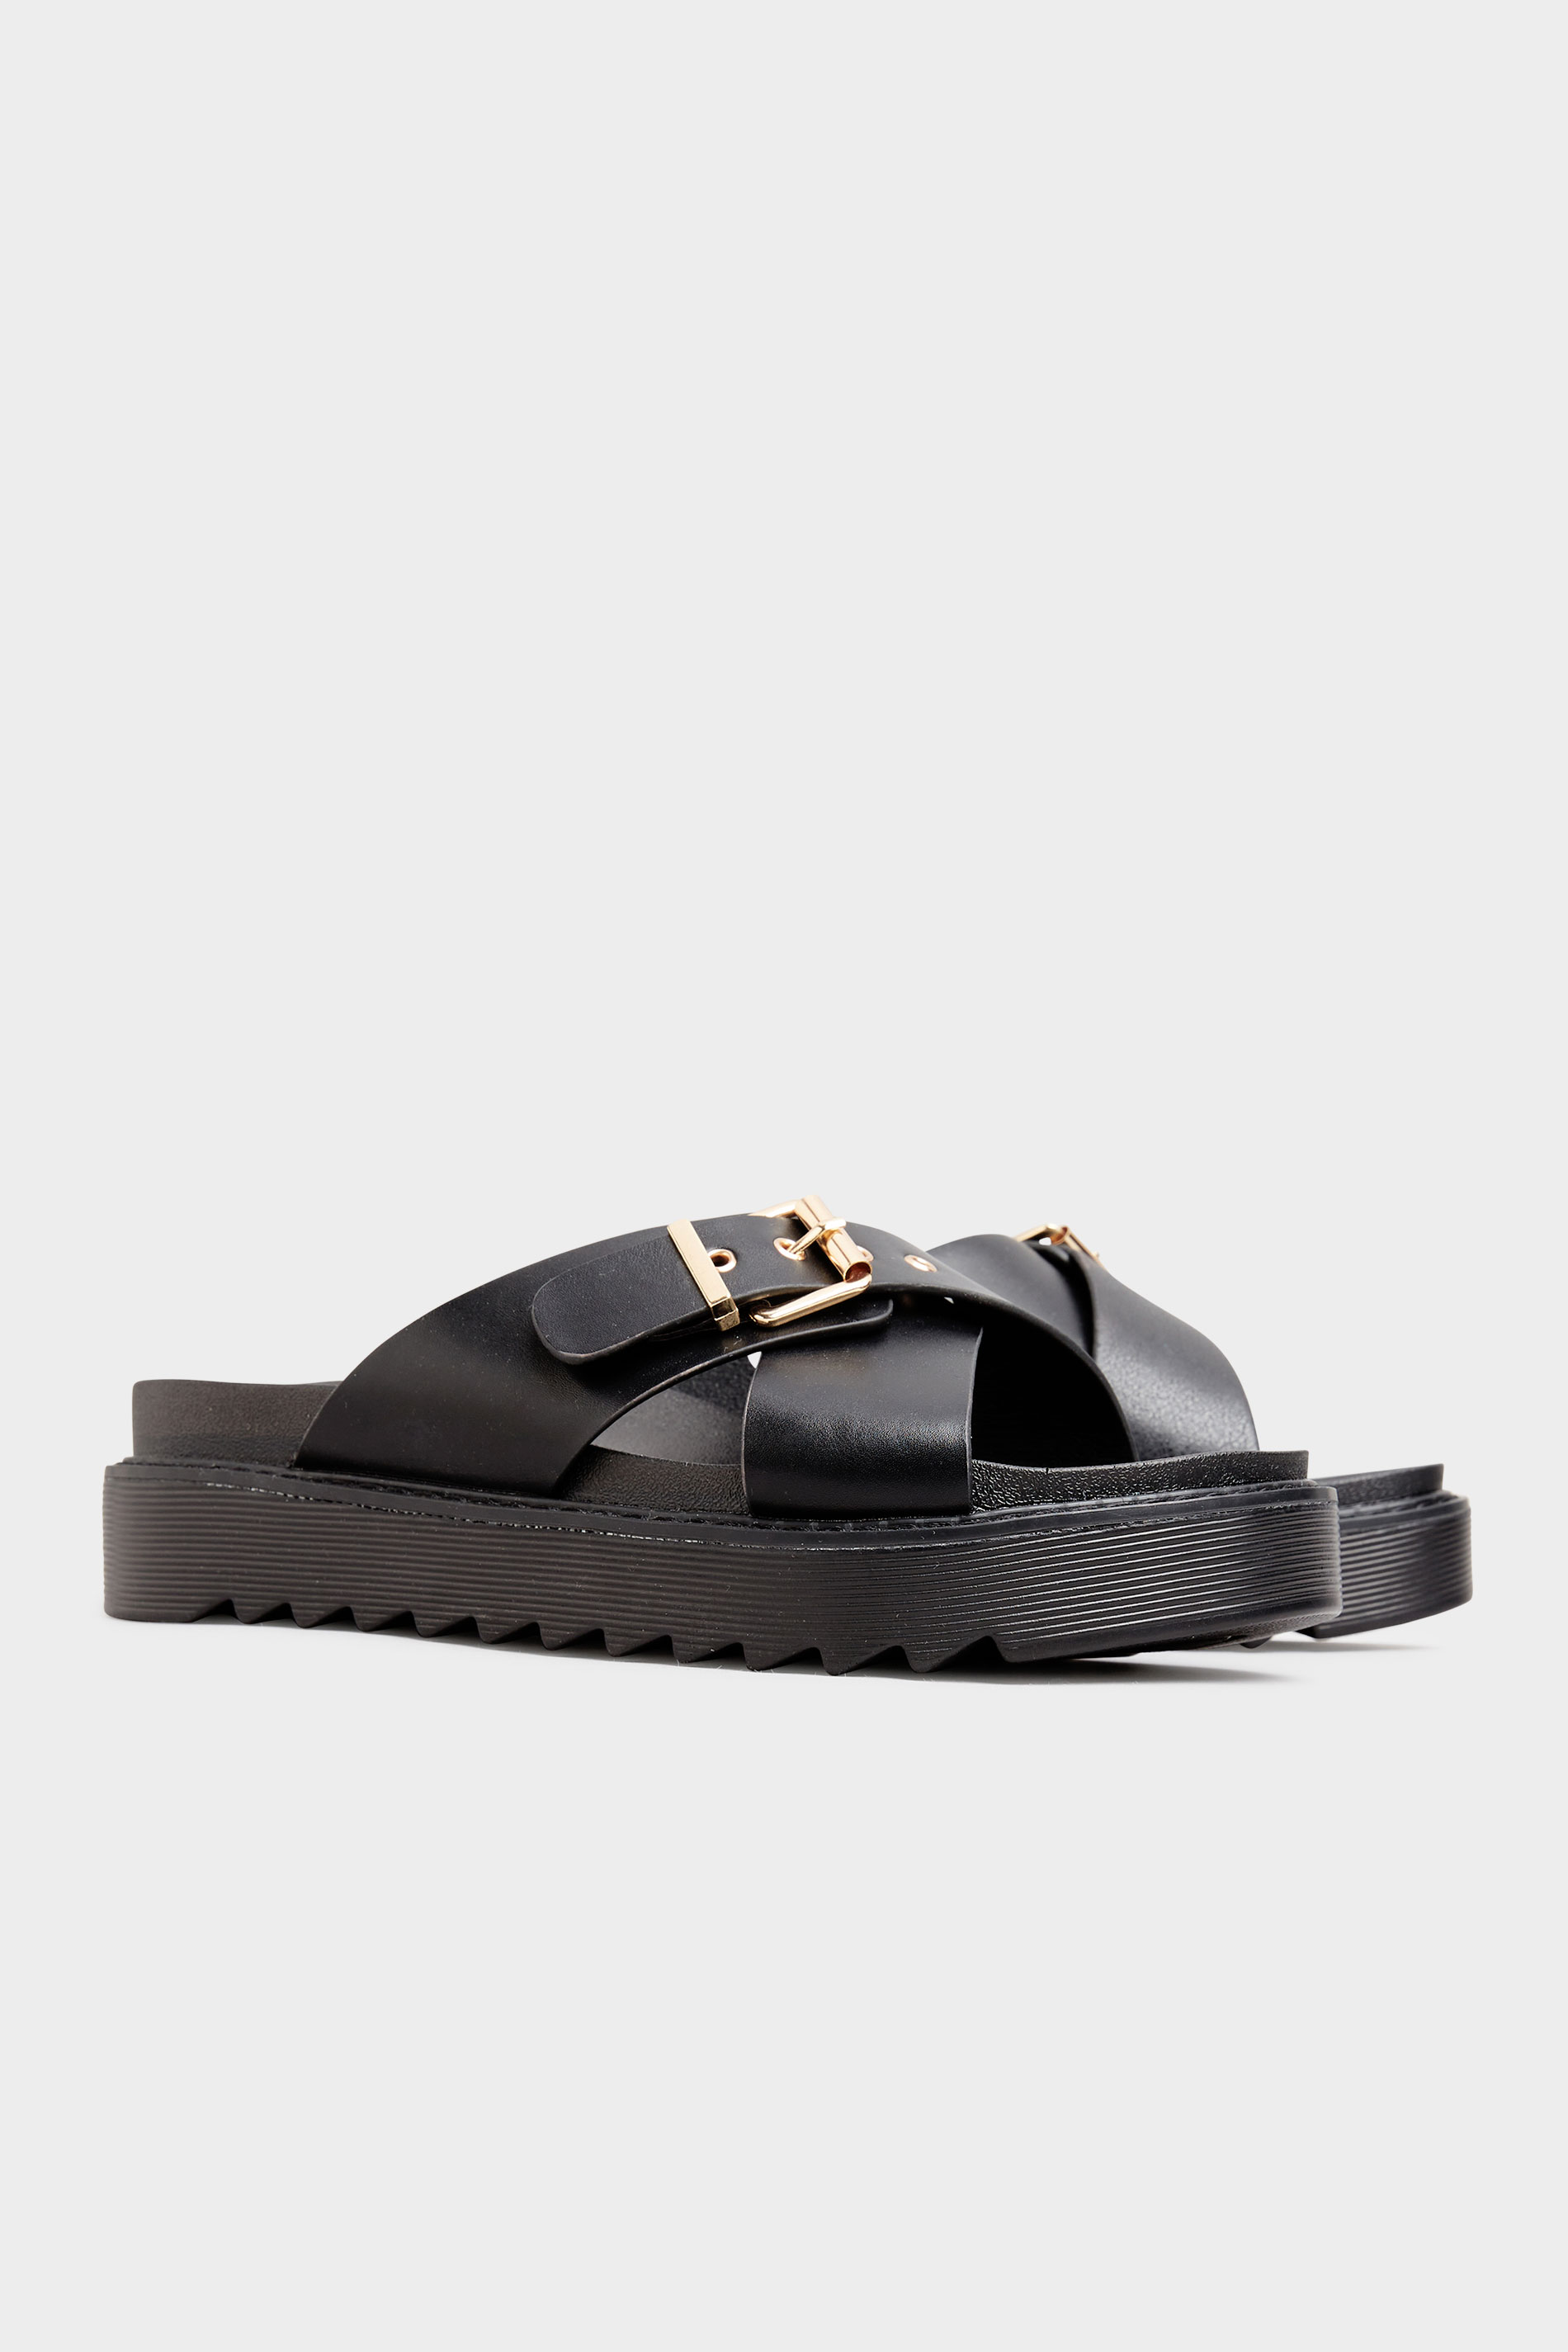 Black Buckle Chunky Slider in Regular Fit | Long Tall Sally